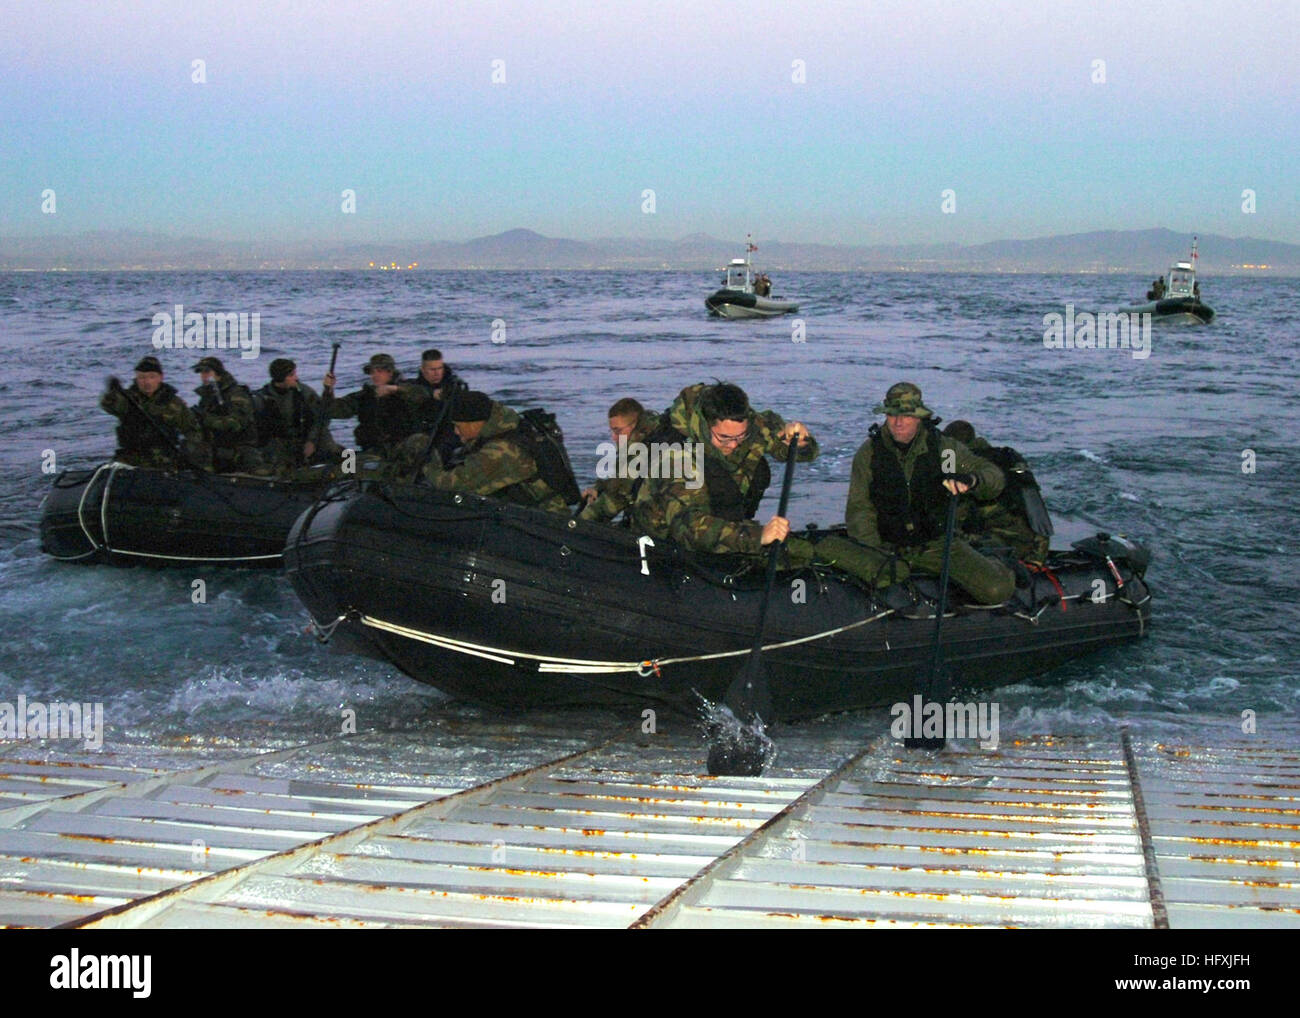 060120-N-7027P-107 Pacific Ocean (Jan. 19, 2006) - Personnel assigned to U.S. Naval Special Clearance Team One (NSCT-1) deploy their combat rubber raiding crafts F-580 (CRRC) off the stern gate of the amphibious dock landing ship USS Comstock (LSD 45). NSCT-1 is currently conducting mine counter measure training operations. U.S. Navy photo by Photographer's Mate 2nd Class Sandra M. Palumbo (RELEASED) US Navy 060120-N-7027P-107 Personnel assigned to U.S. Naval Special Clearance Team One (NSCT-1) deploy their combat rubber raiding crafts F-580 (CRRC) off the stern gate Stock Photo